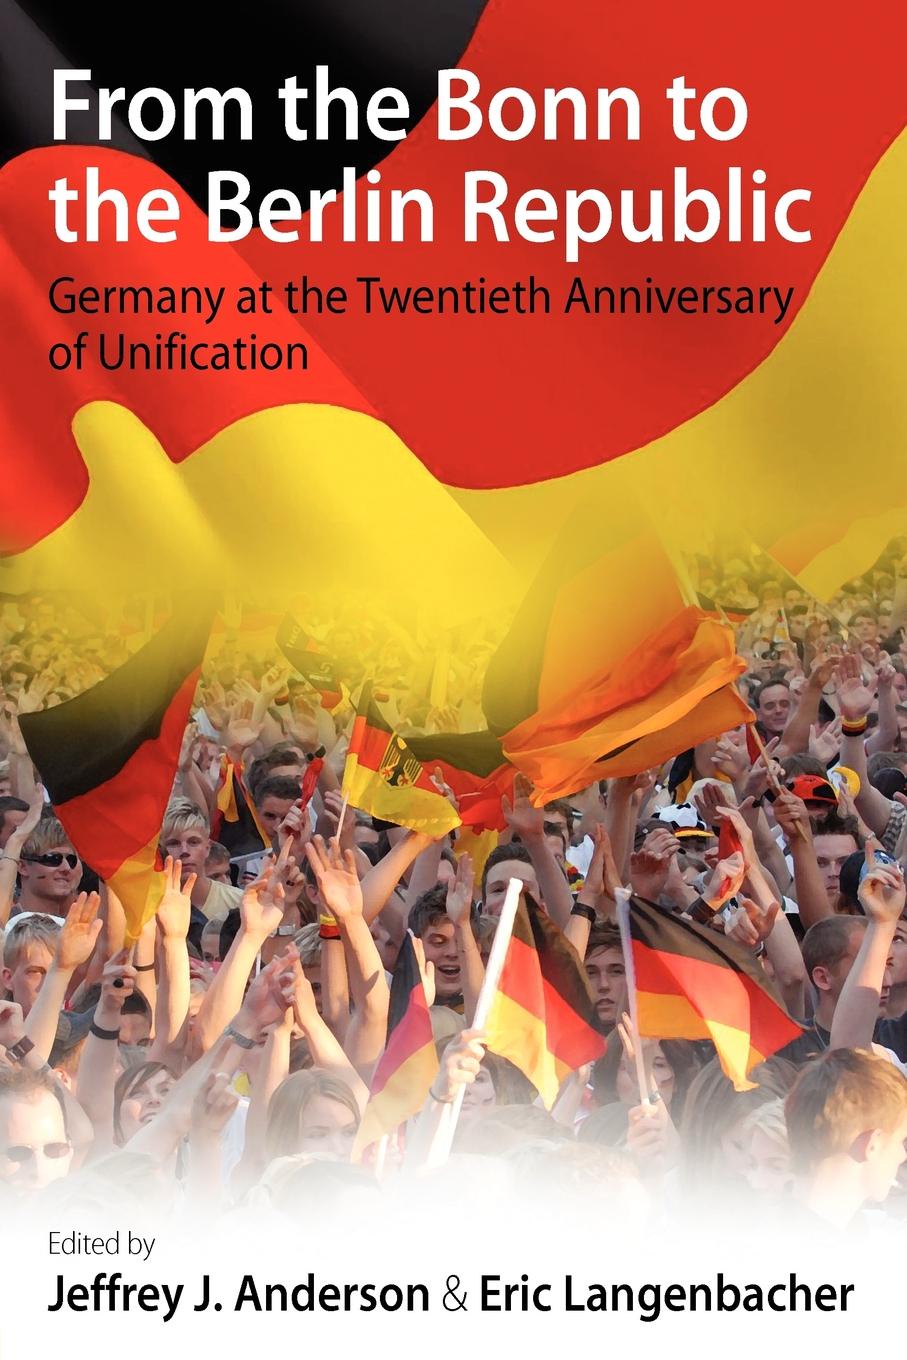 From the Bonn to the Berlin Republic. Germany at the Twentieth Anniversary of Unification